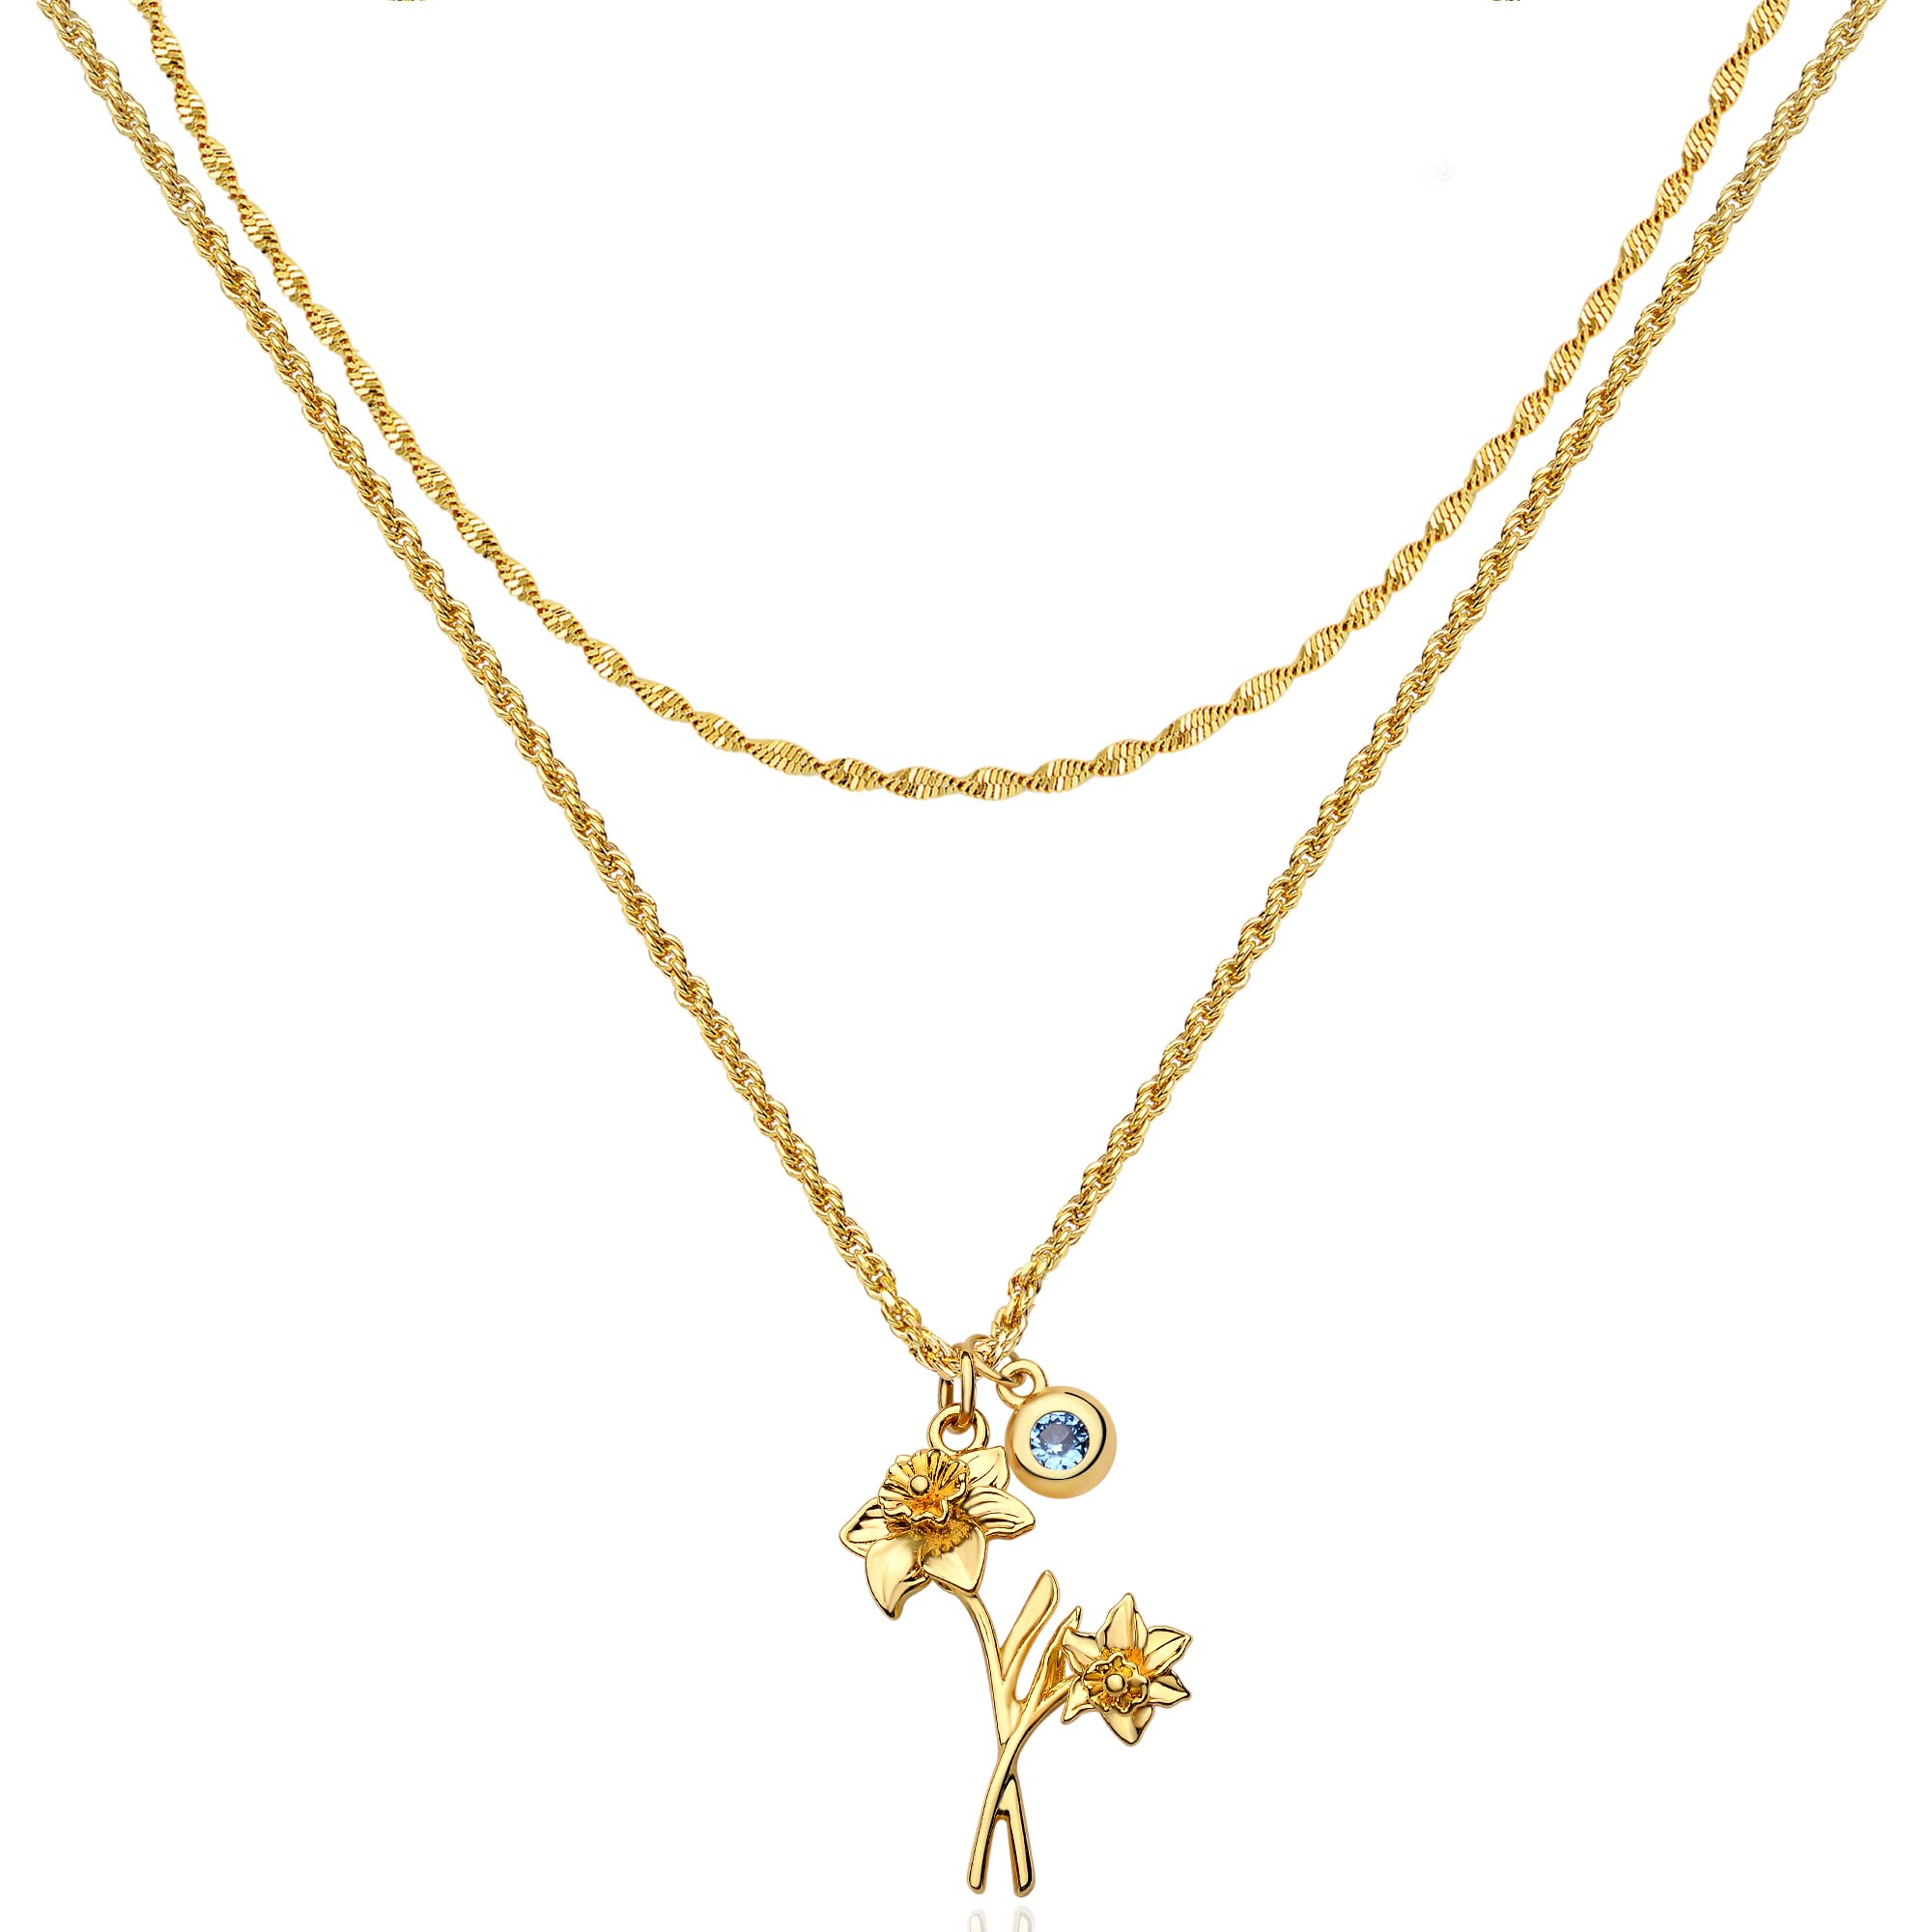 MEVECCO Gold Layered Everbloom Birth Flower Necklace Daffodil Floral Pendant with Aquamarine Birthstone for March 18k Gold Vacuu